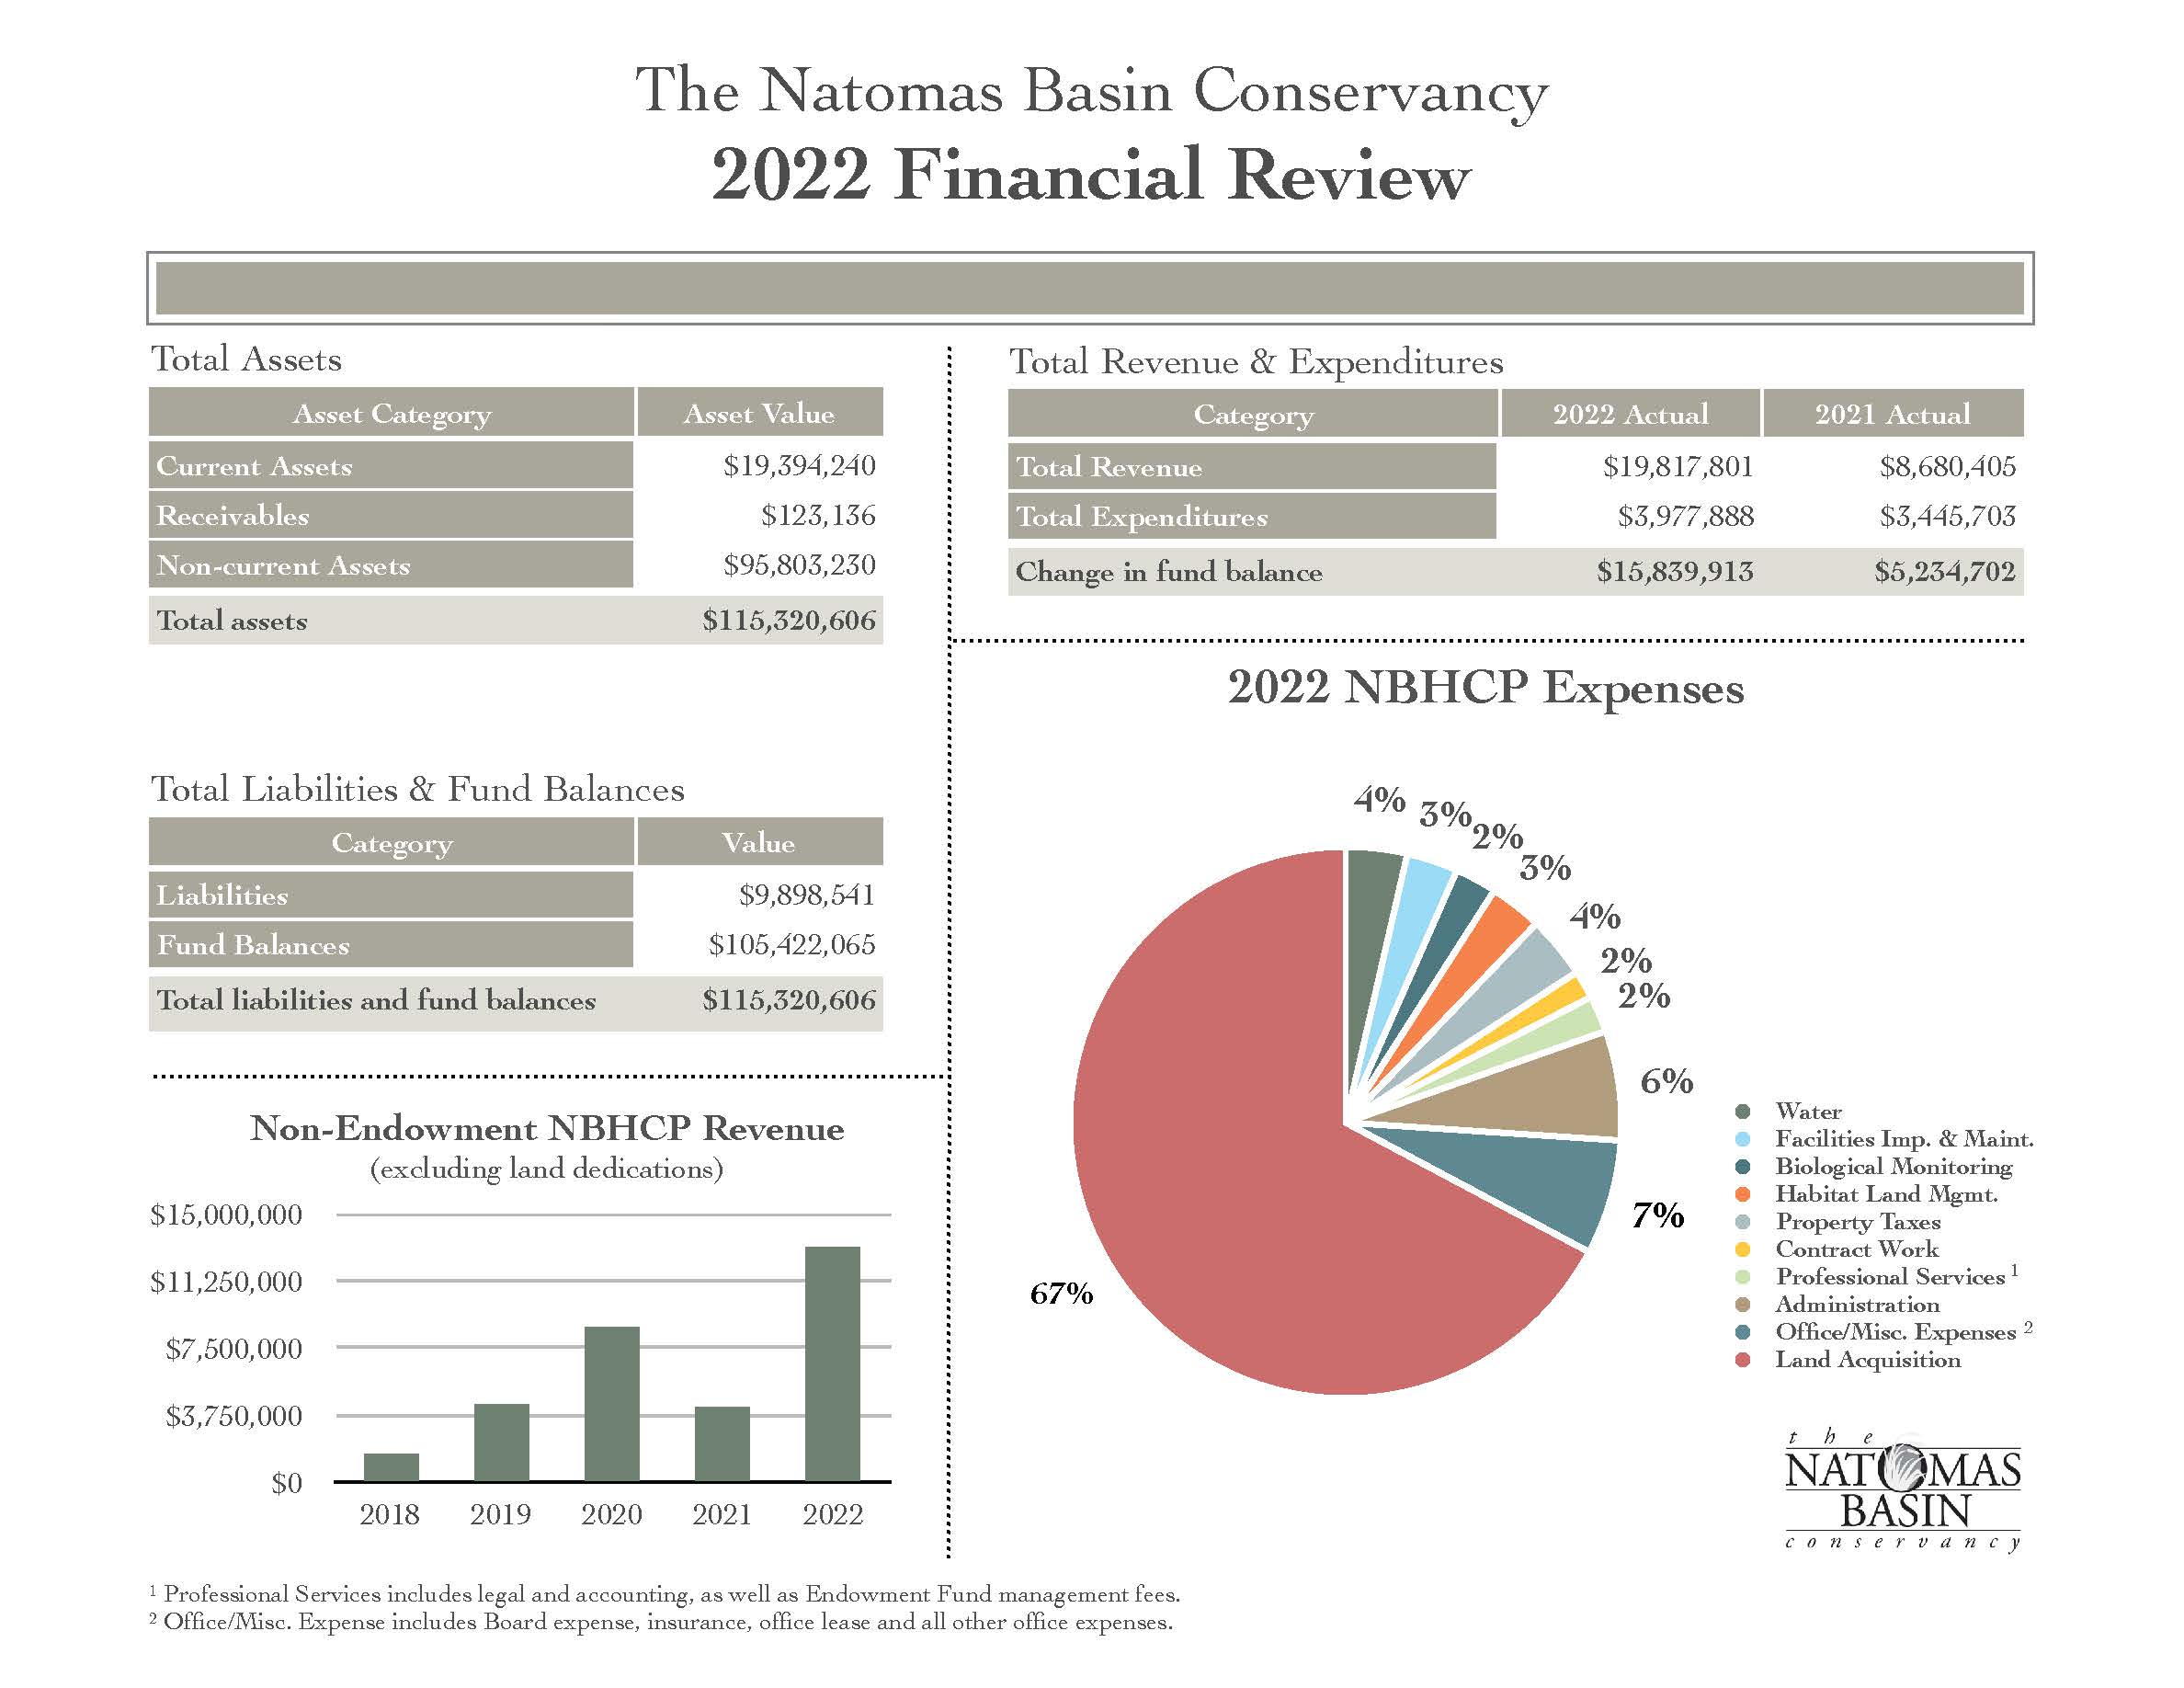 Color chart referencing the 2021 Financial Review. There are four sections, each showing asset values, liabilities and fund balances, revenue and expenditures, and a pie chart to visually indicate the percentage breakdown of expenses.